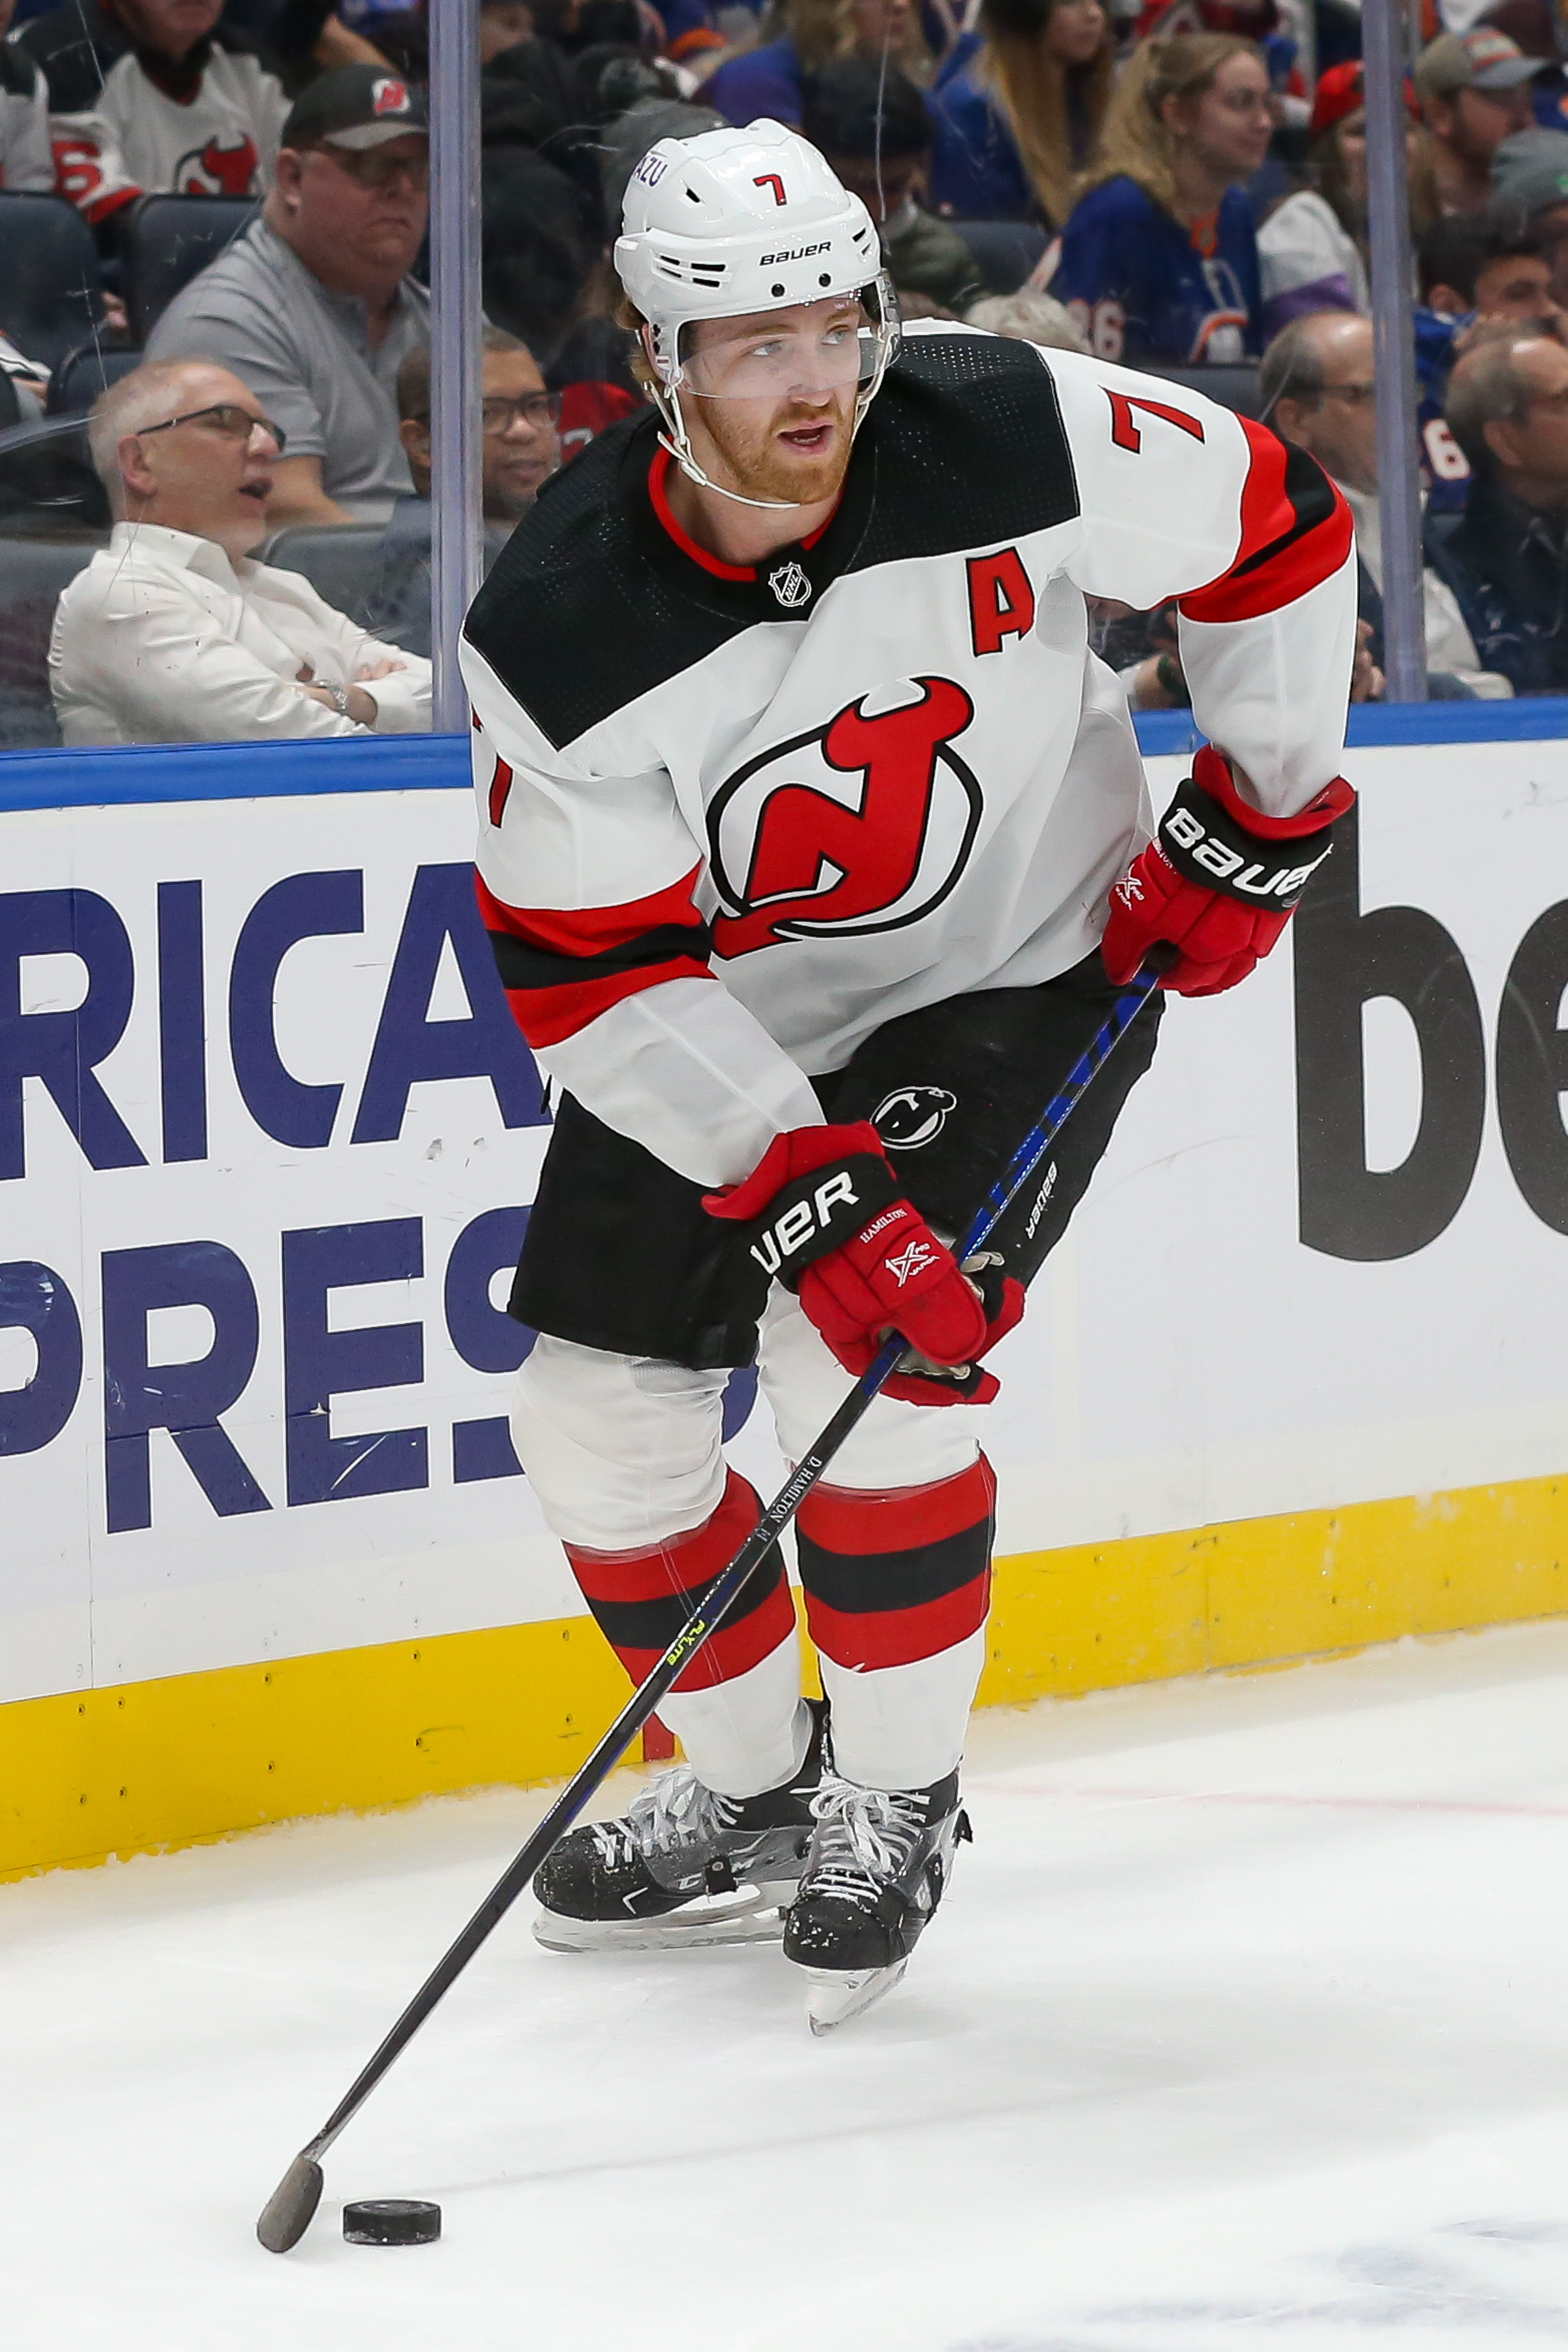 Should The New Jersey Devils Trade Cory Schneider To Stop Wasting Him?